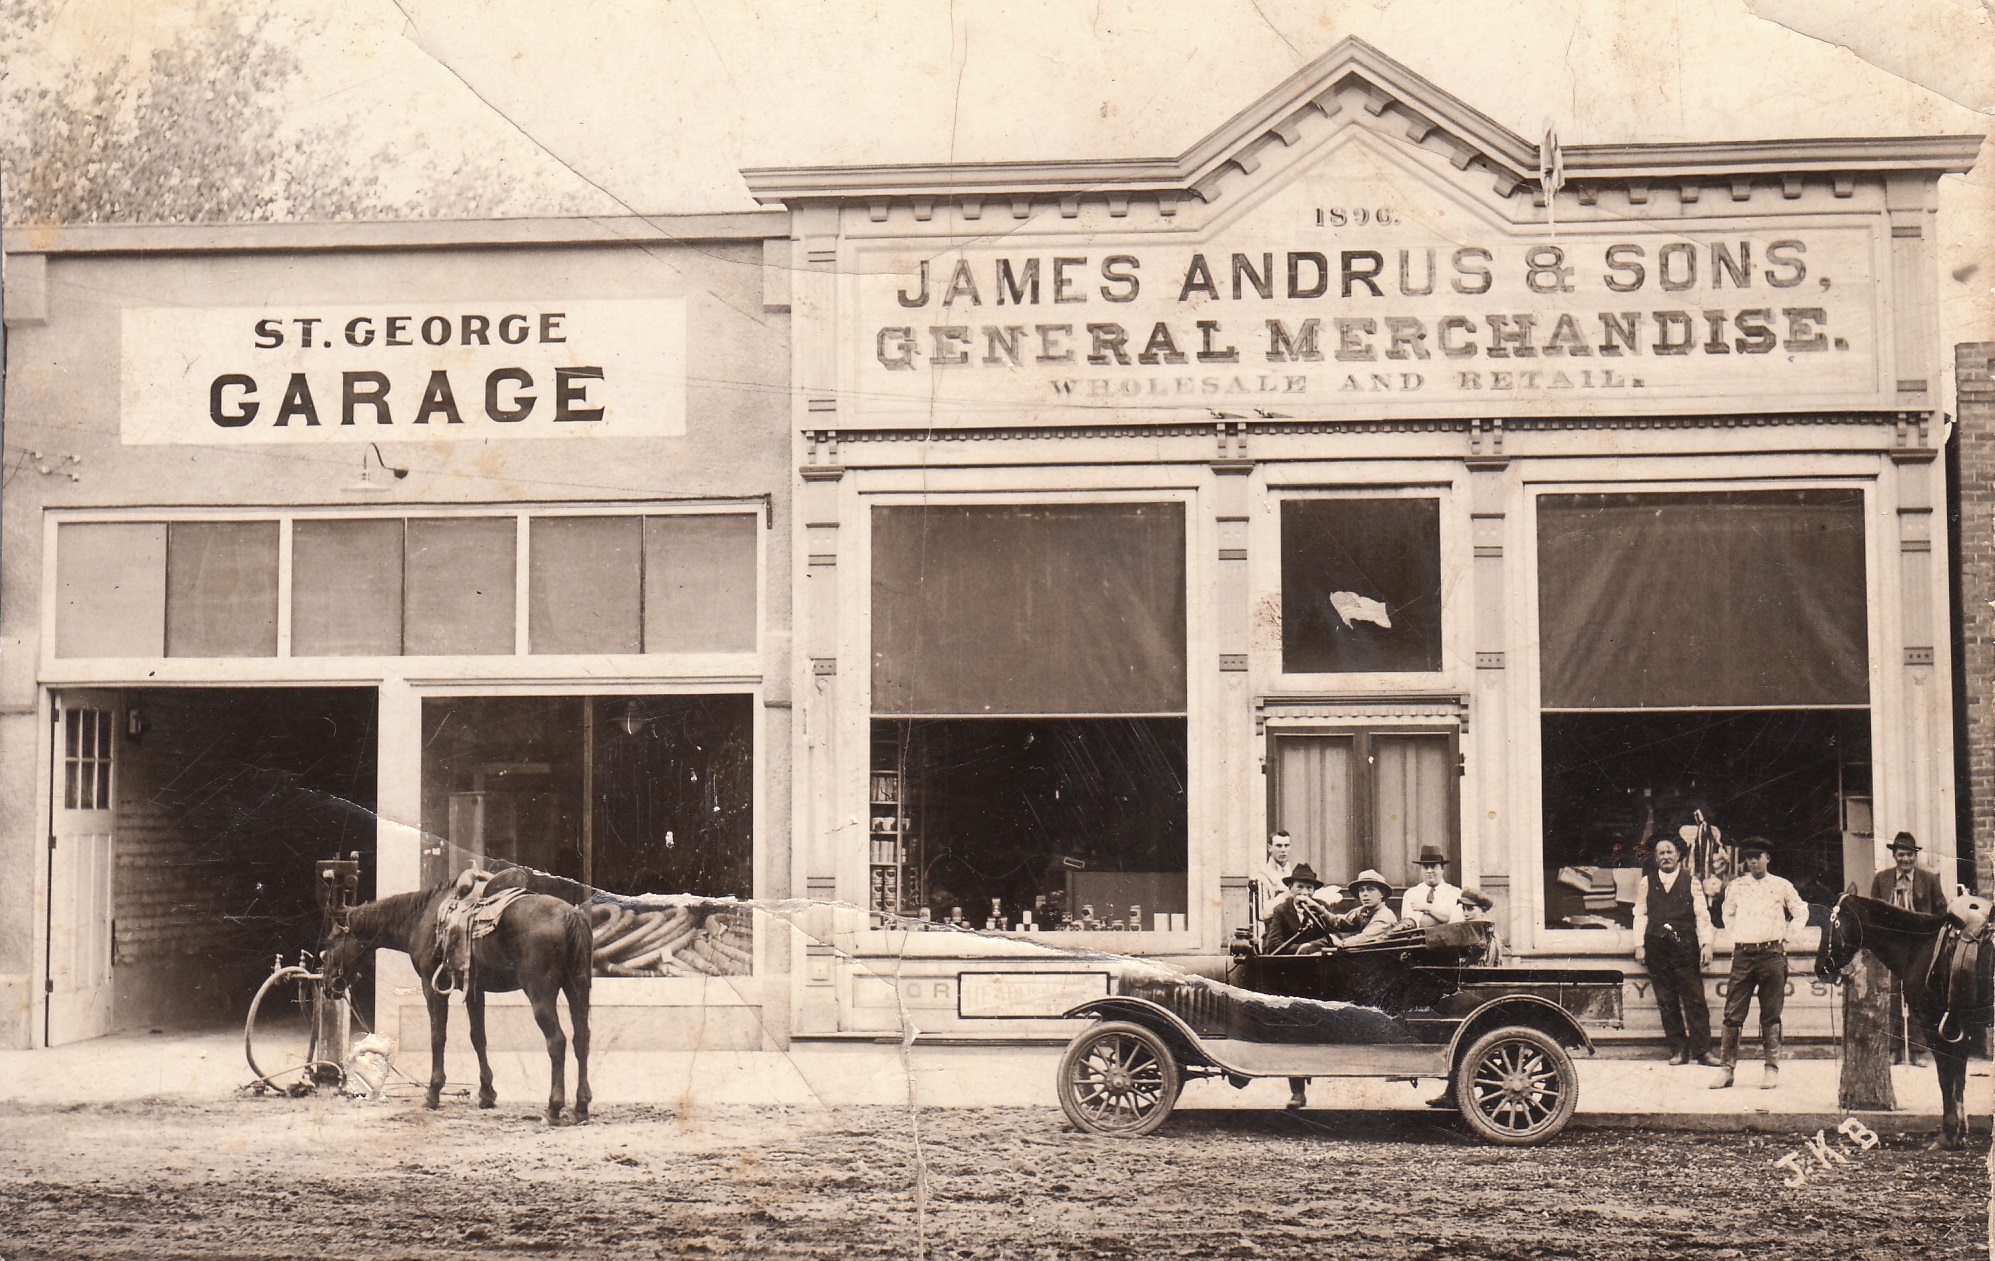 The St. George Garage and the James Andrus & Sons General Merchandise Store